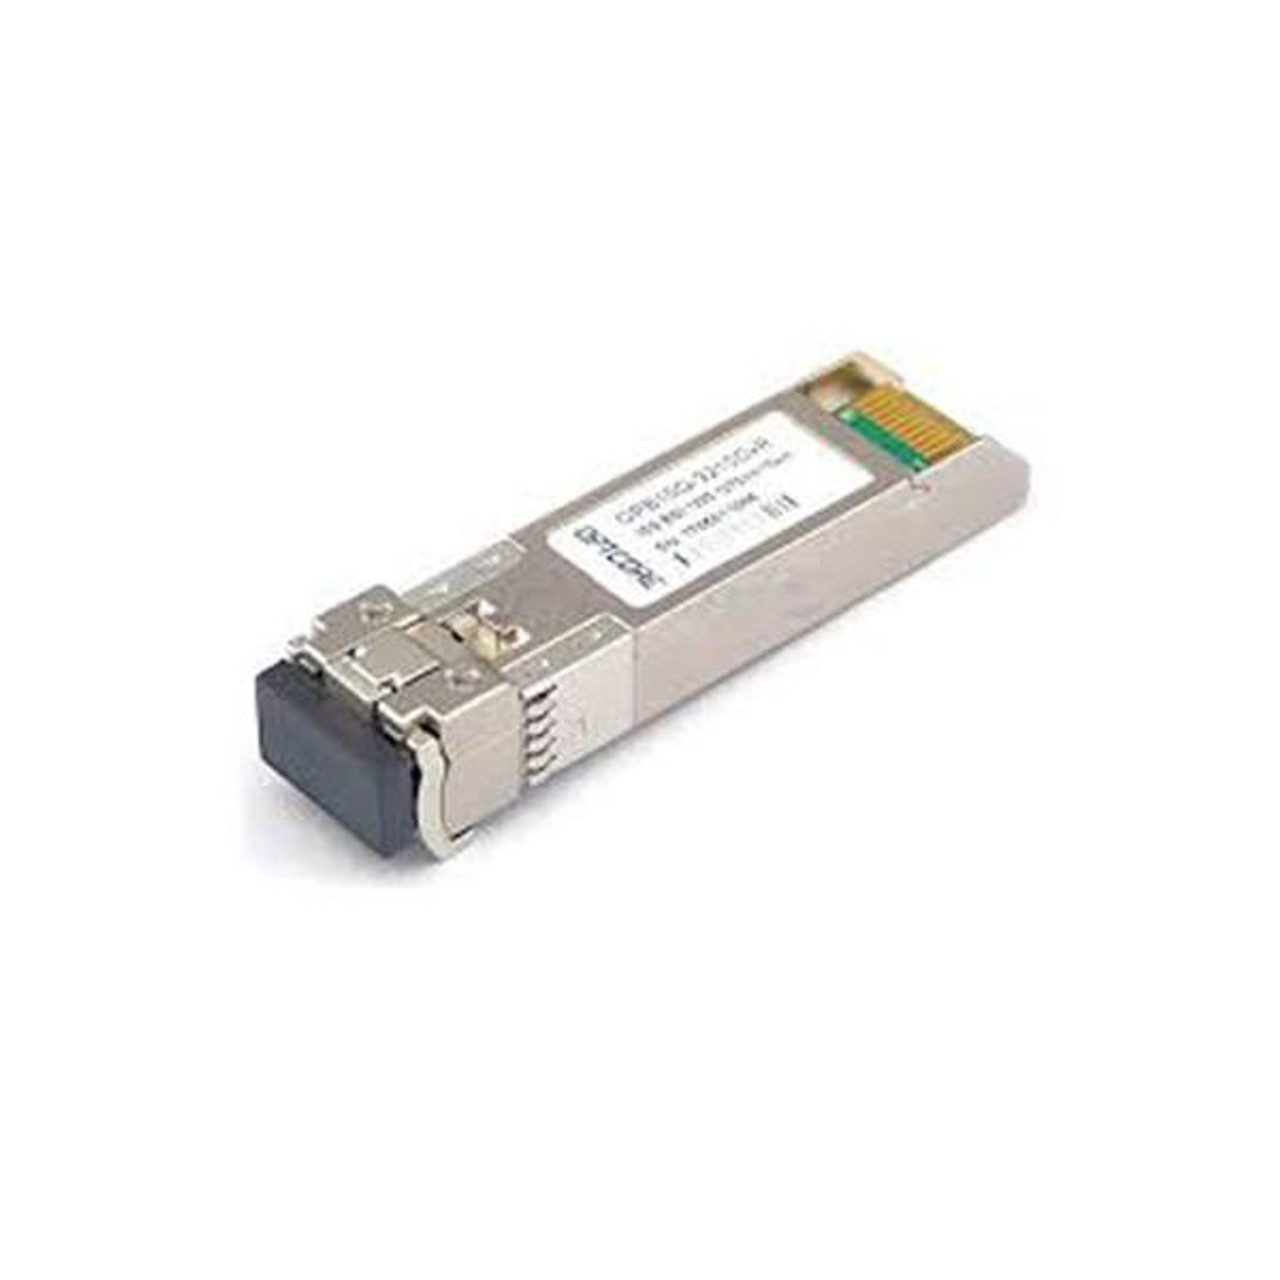 10G-SFPP-BXD-S Brocade 10Gbps 10GBase-BX10-D Single-mode Fiber 10km 1330nmTX/1270nmRX LC Connector SFP+ Transceiver Module with DOM